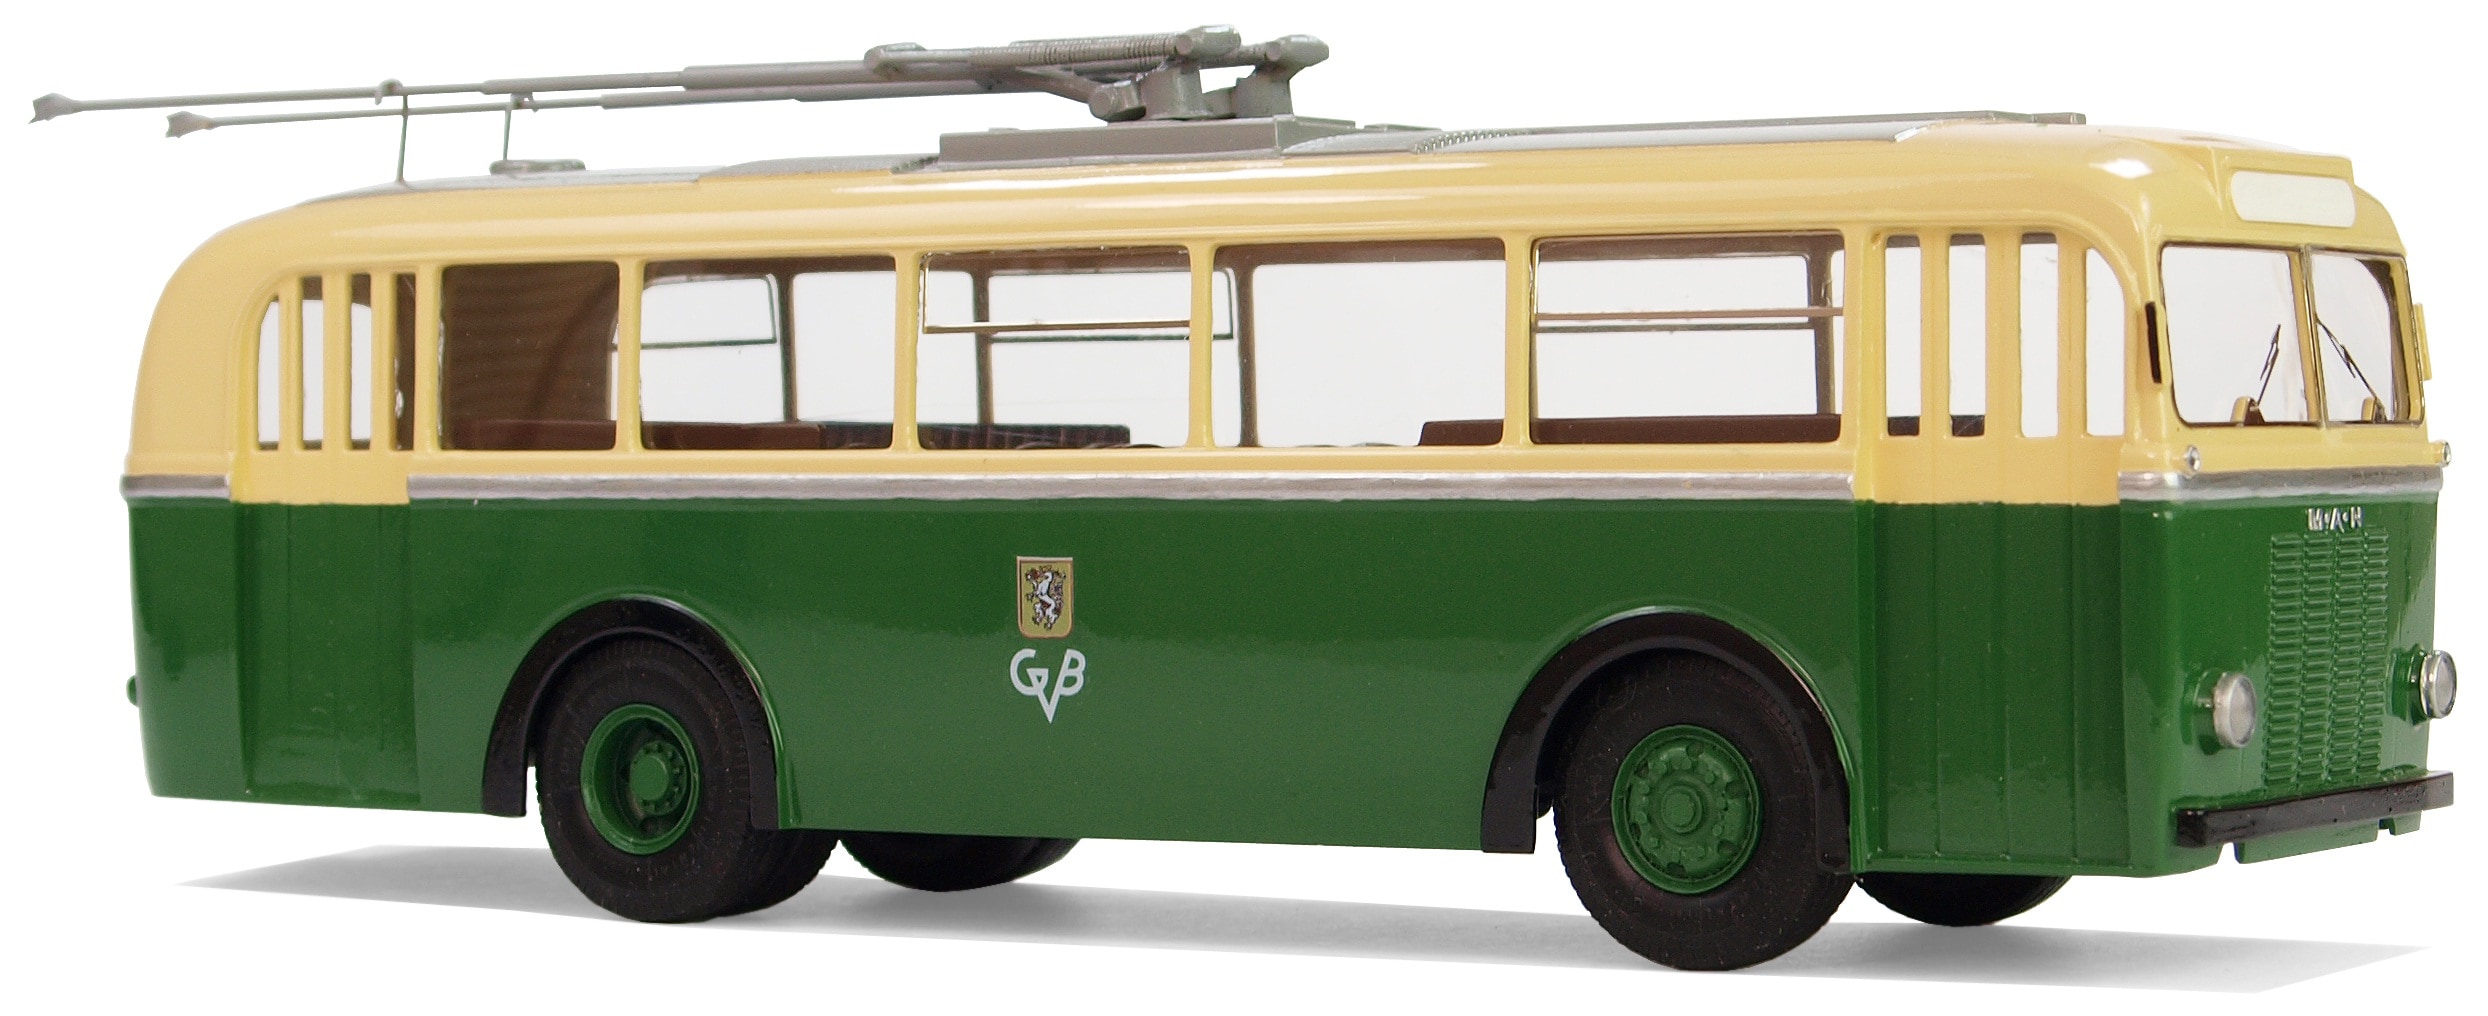 beige and green military bus